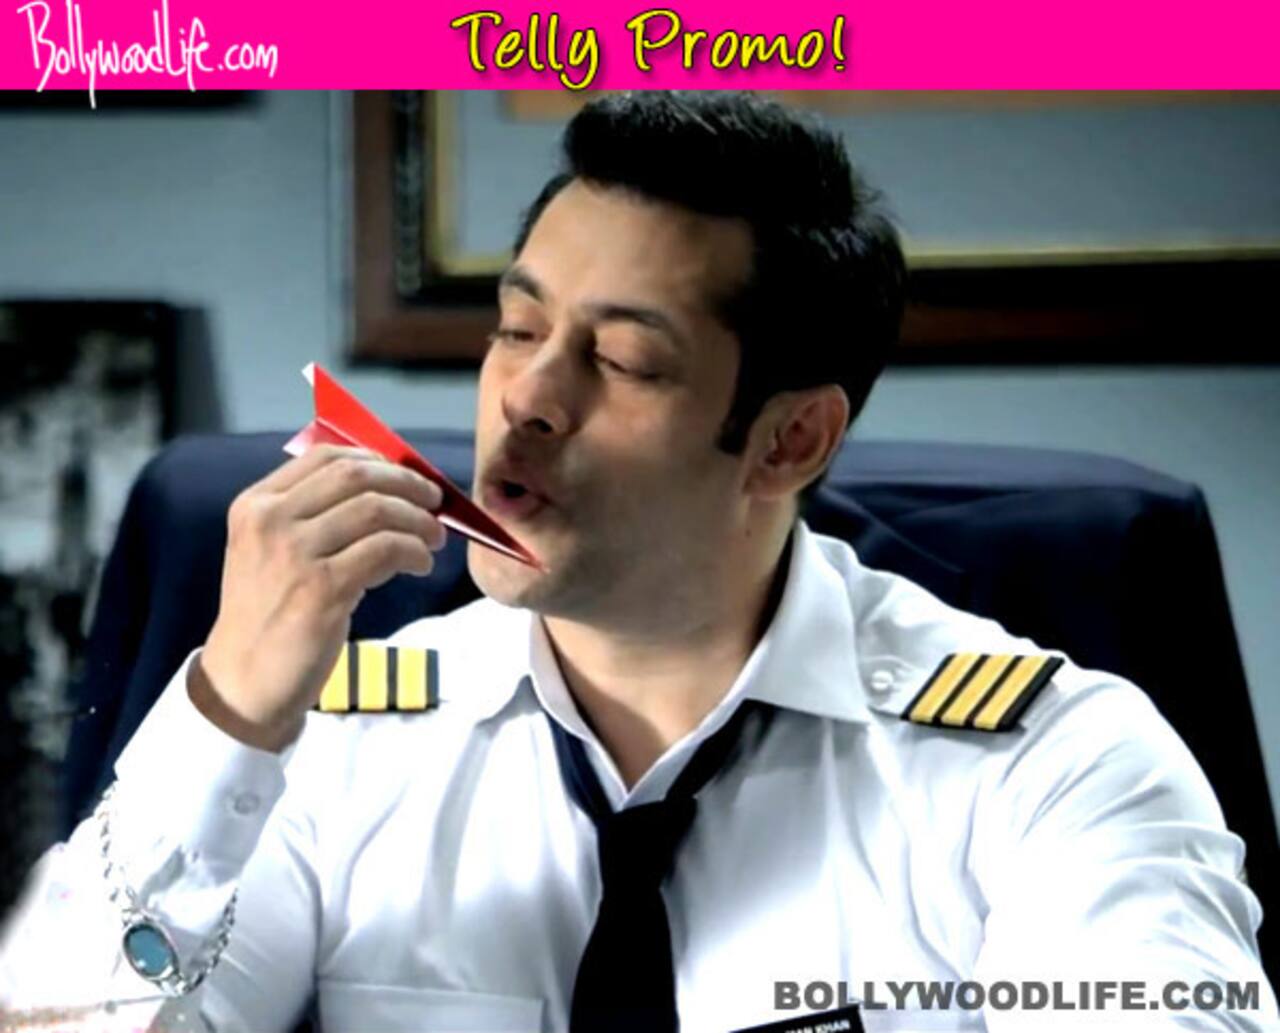 Bigg Boss 8 new promo video: Salman Khan asks viewers to watch out for his grand comeback-watch video!